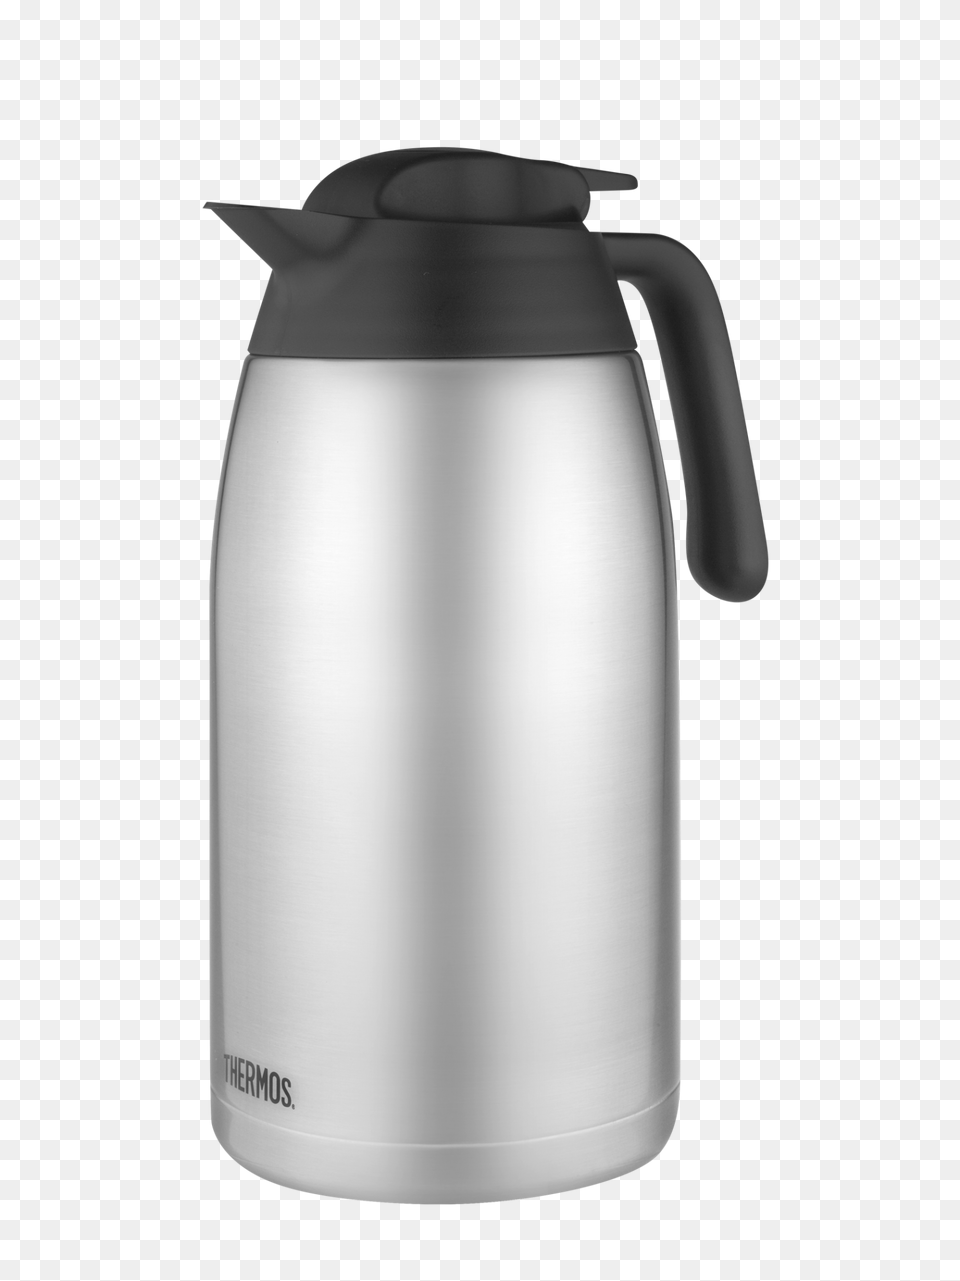 Thermos, Jug, Bottle, Shaker, Cookware Png Image